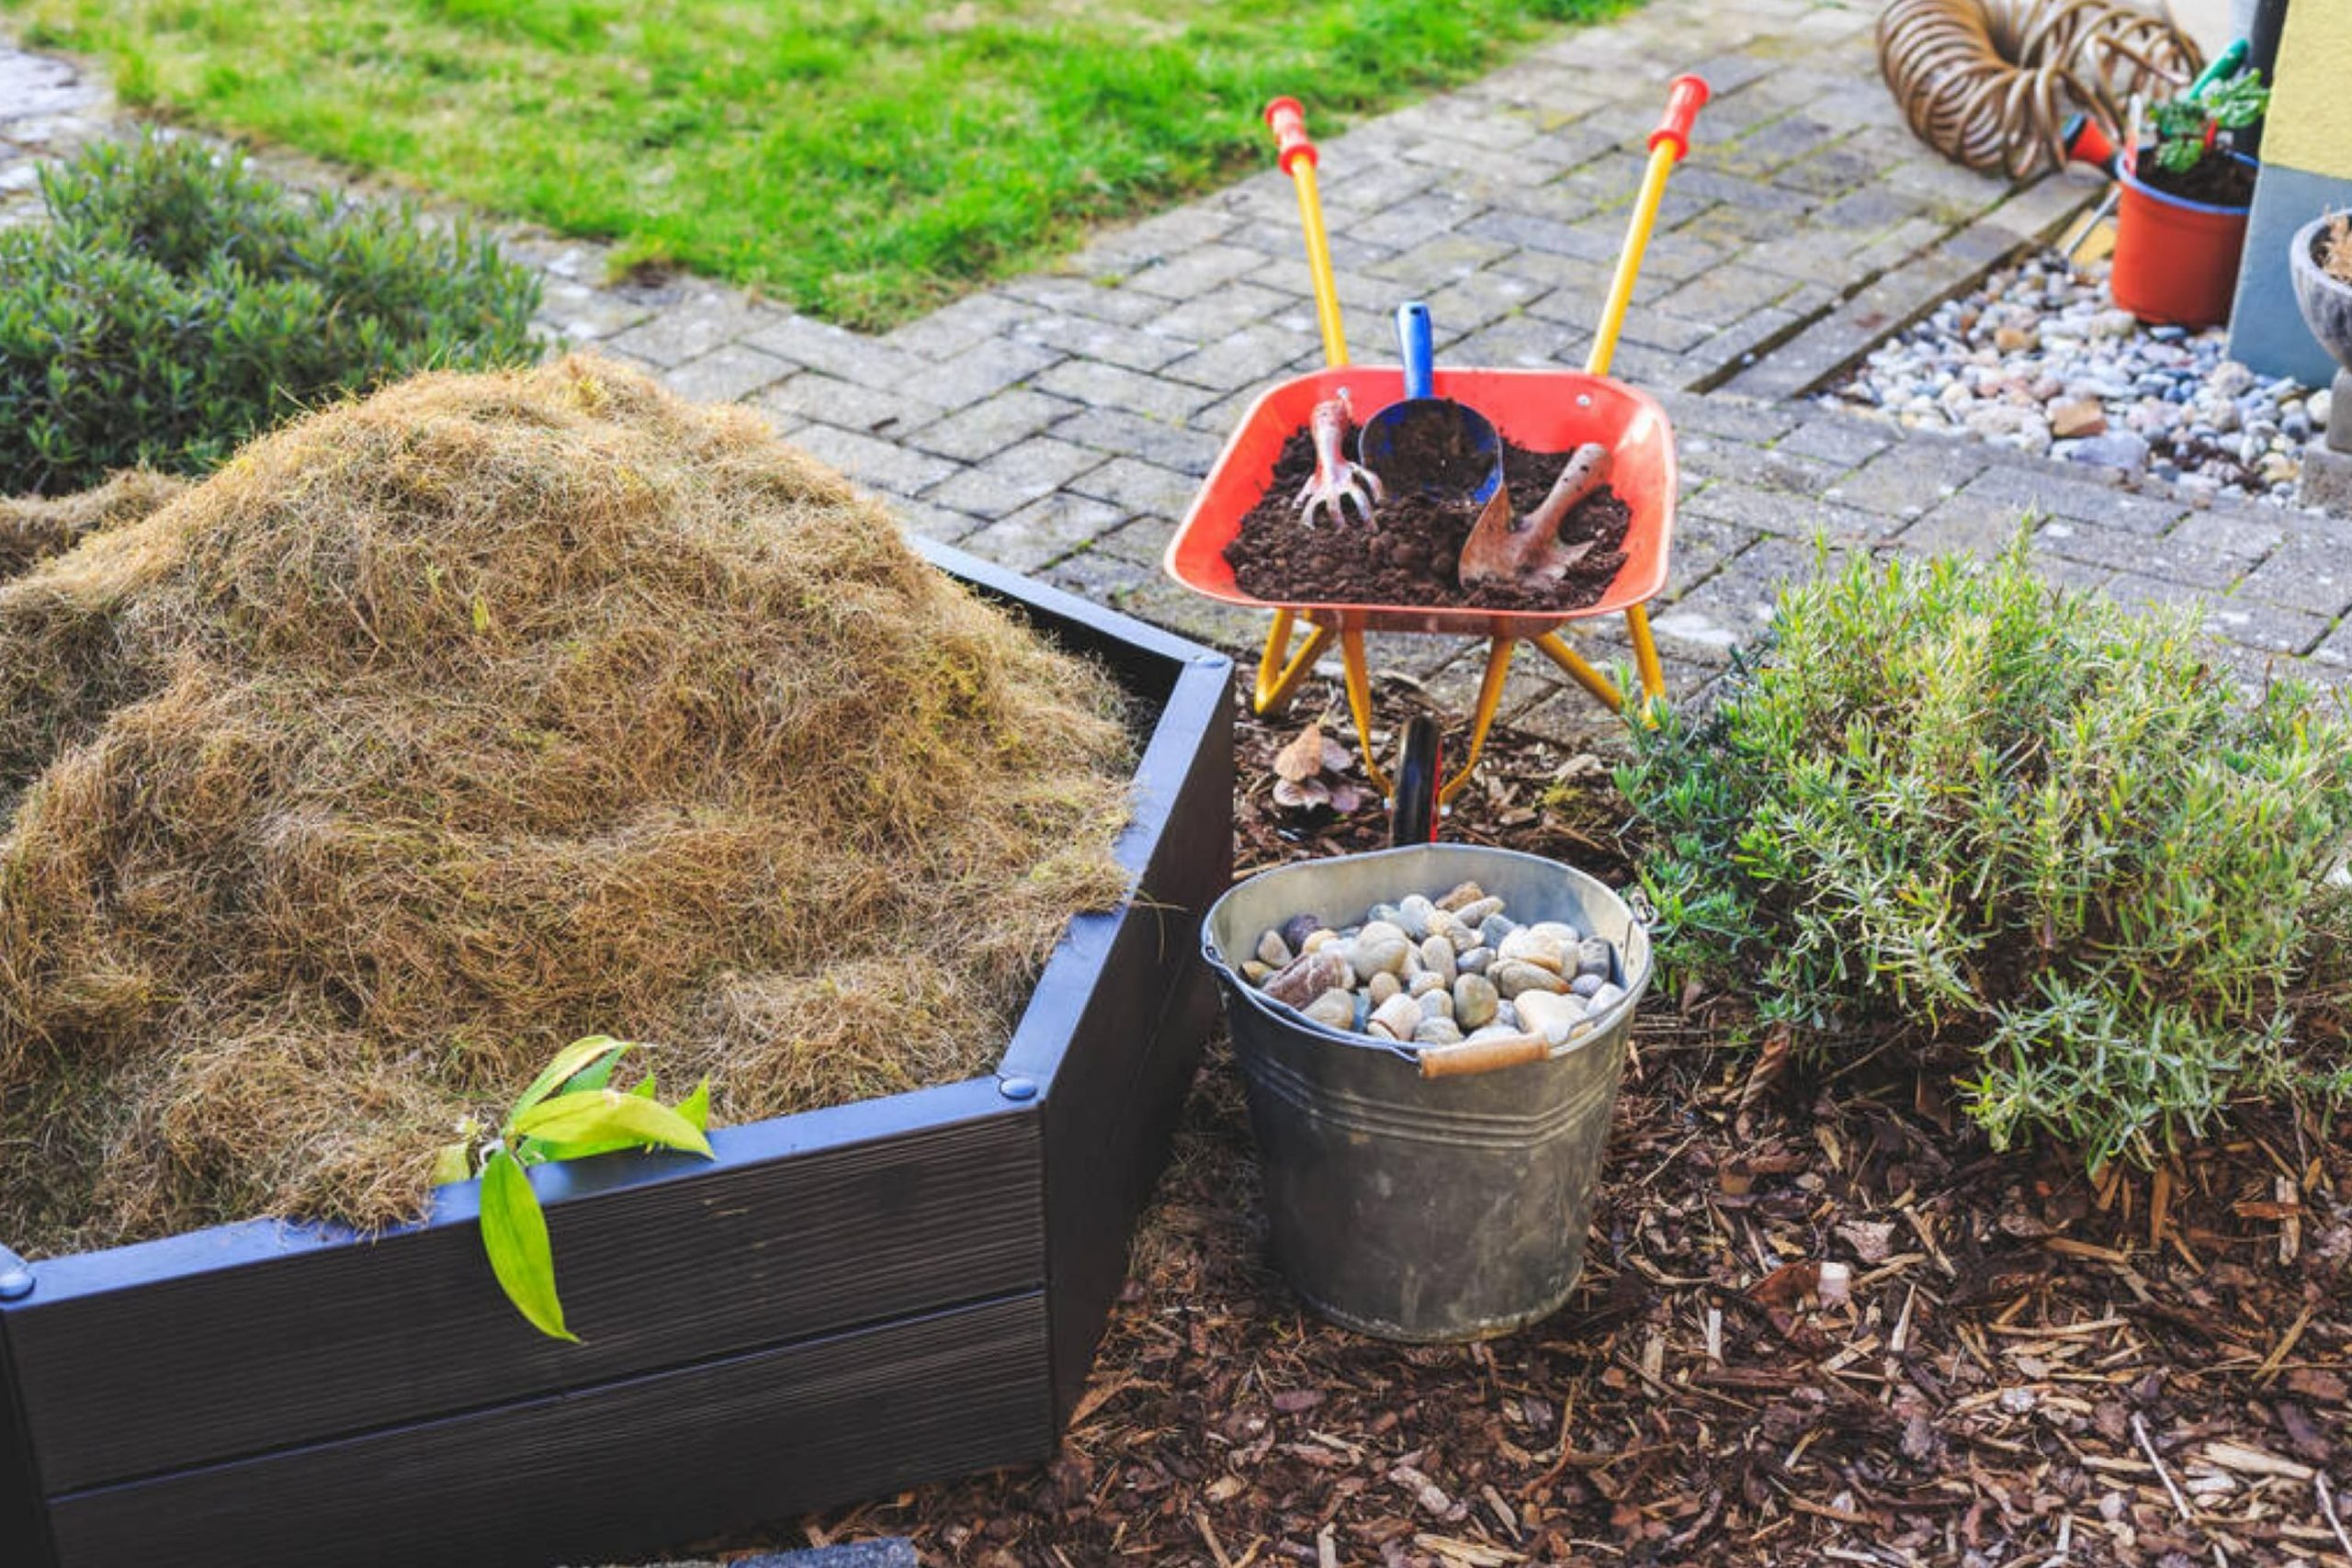 How to Cover Dirt In Backyard For Party